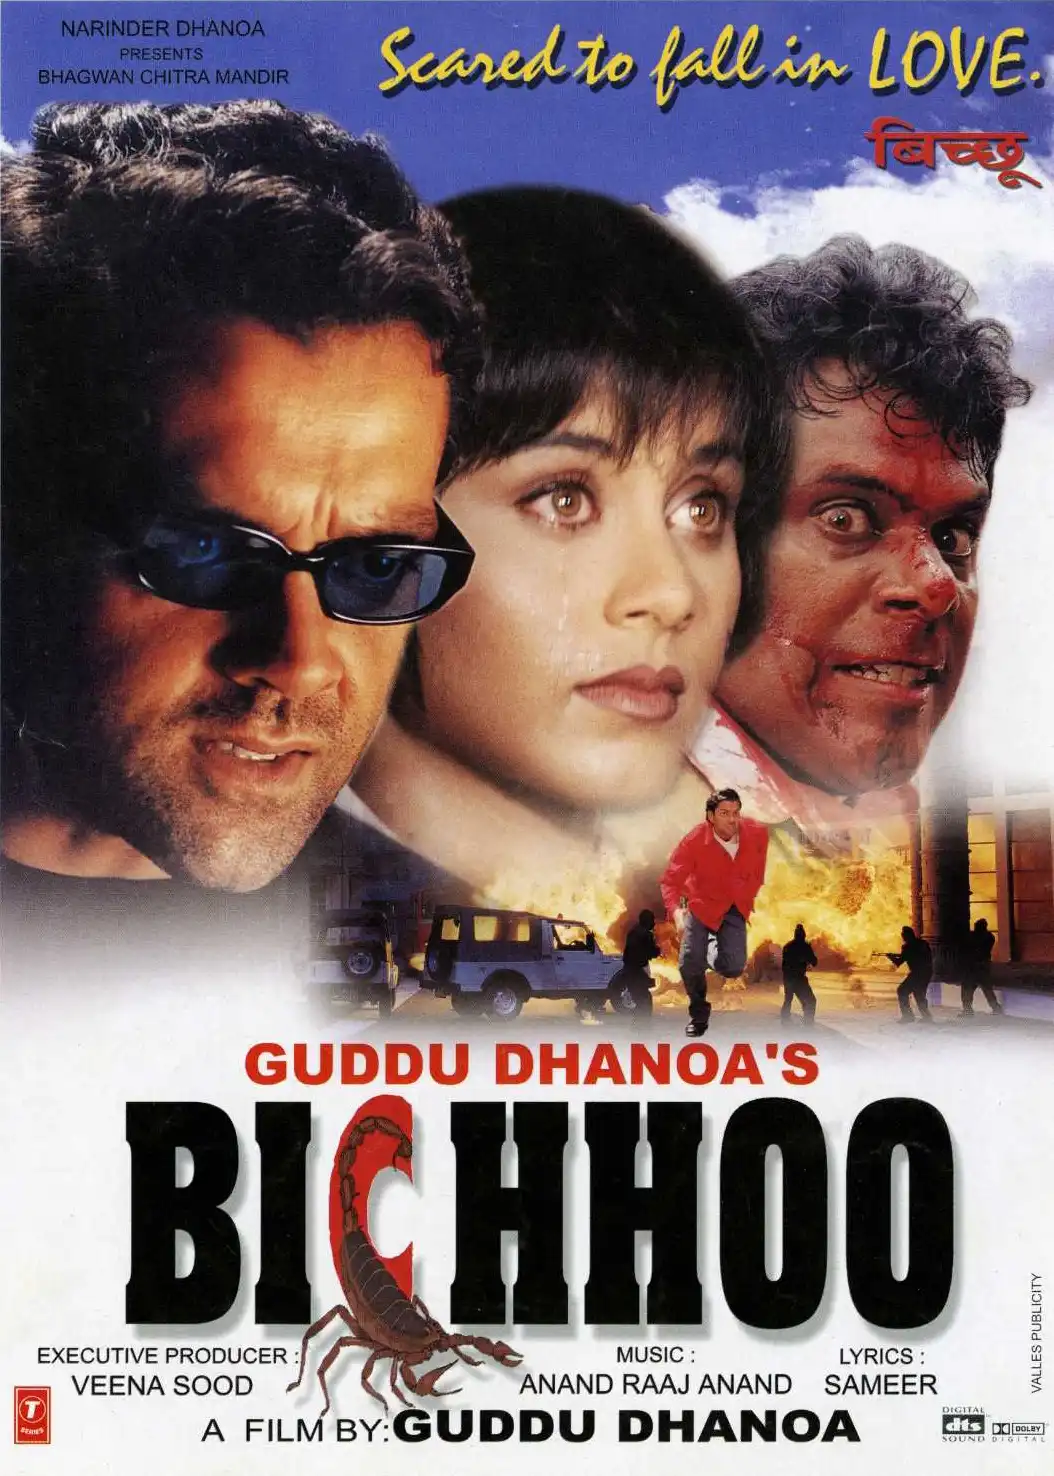 Watch and Download Bichhoo 5